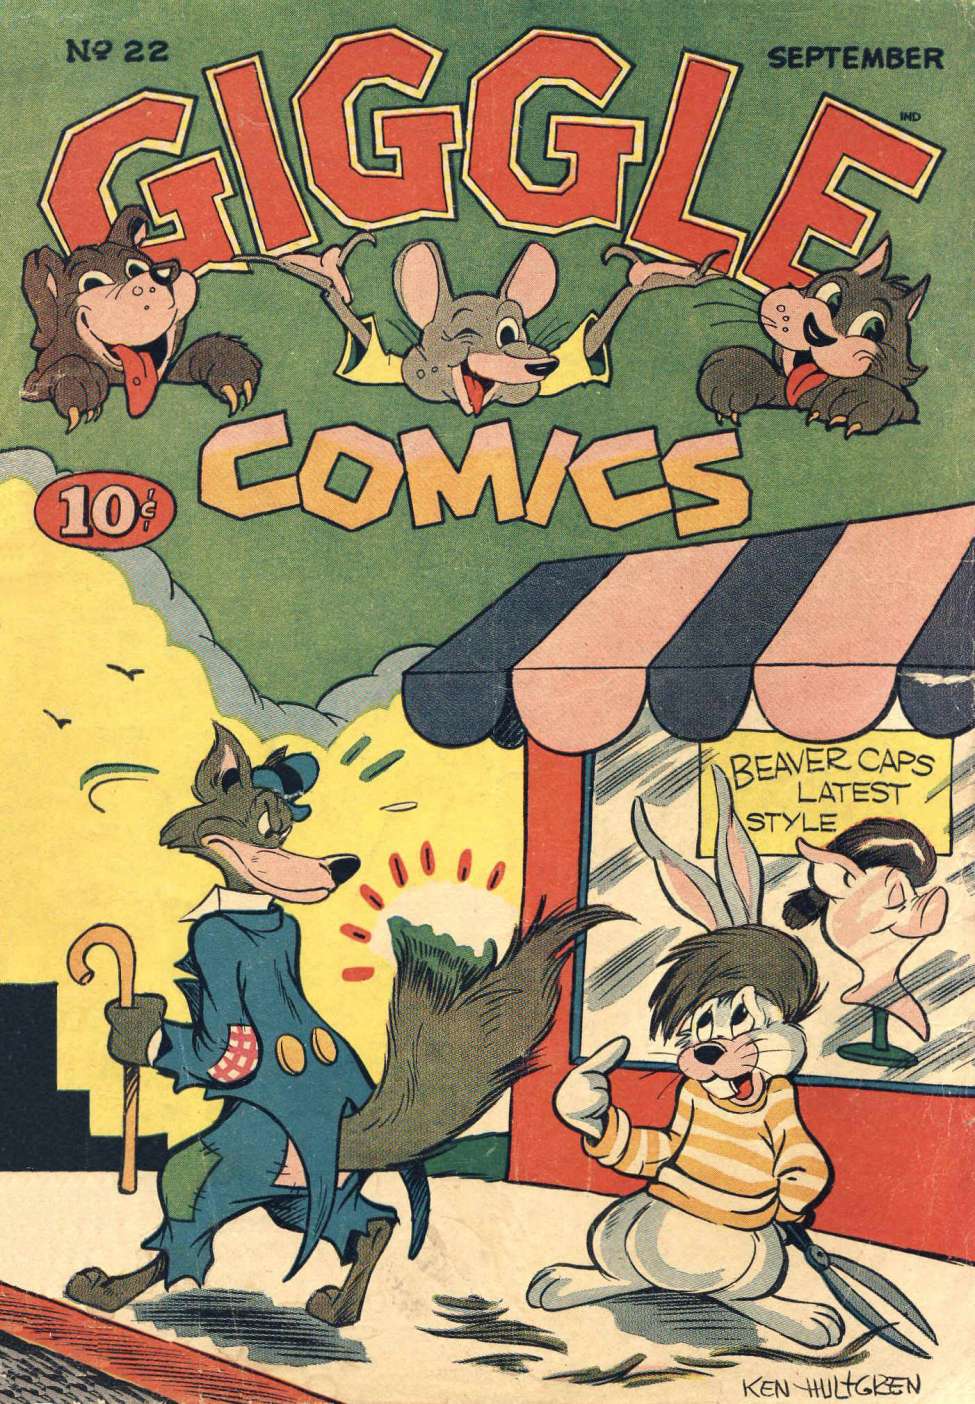 Book Cover For Giggle Comics 22